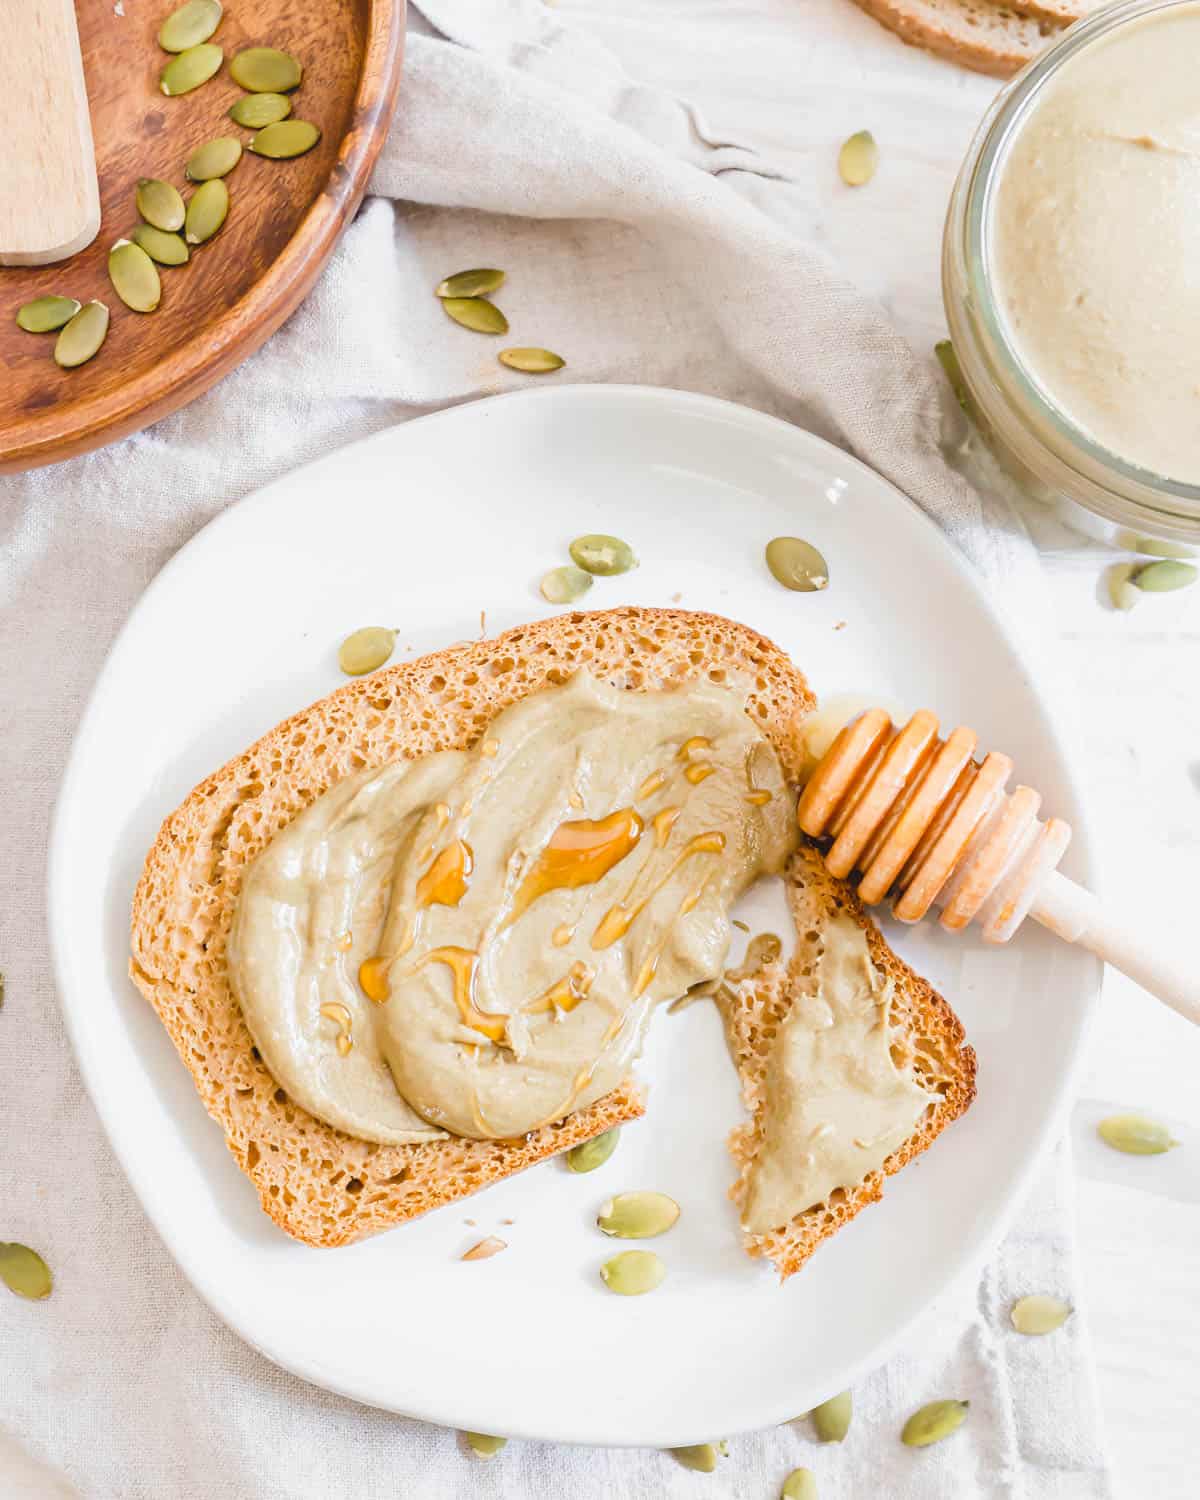 Nut-free pumpkin seed butter spread on toast with raw honey drizzled on top.